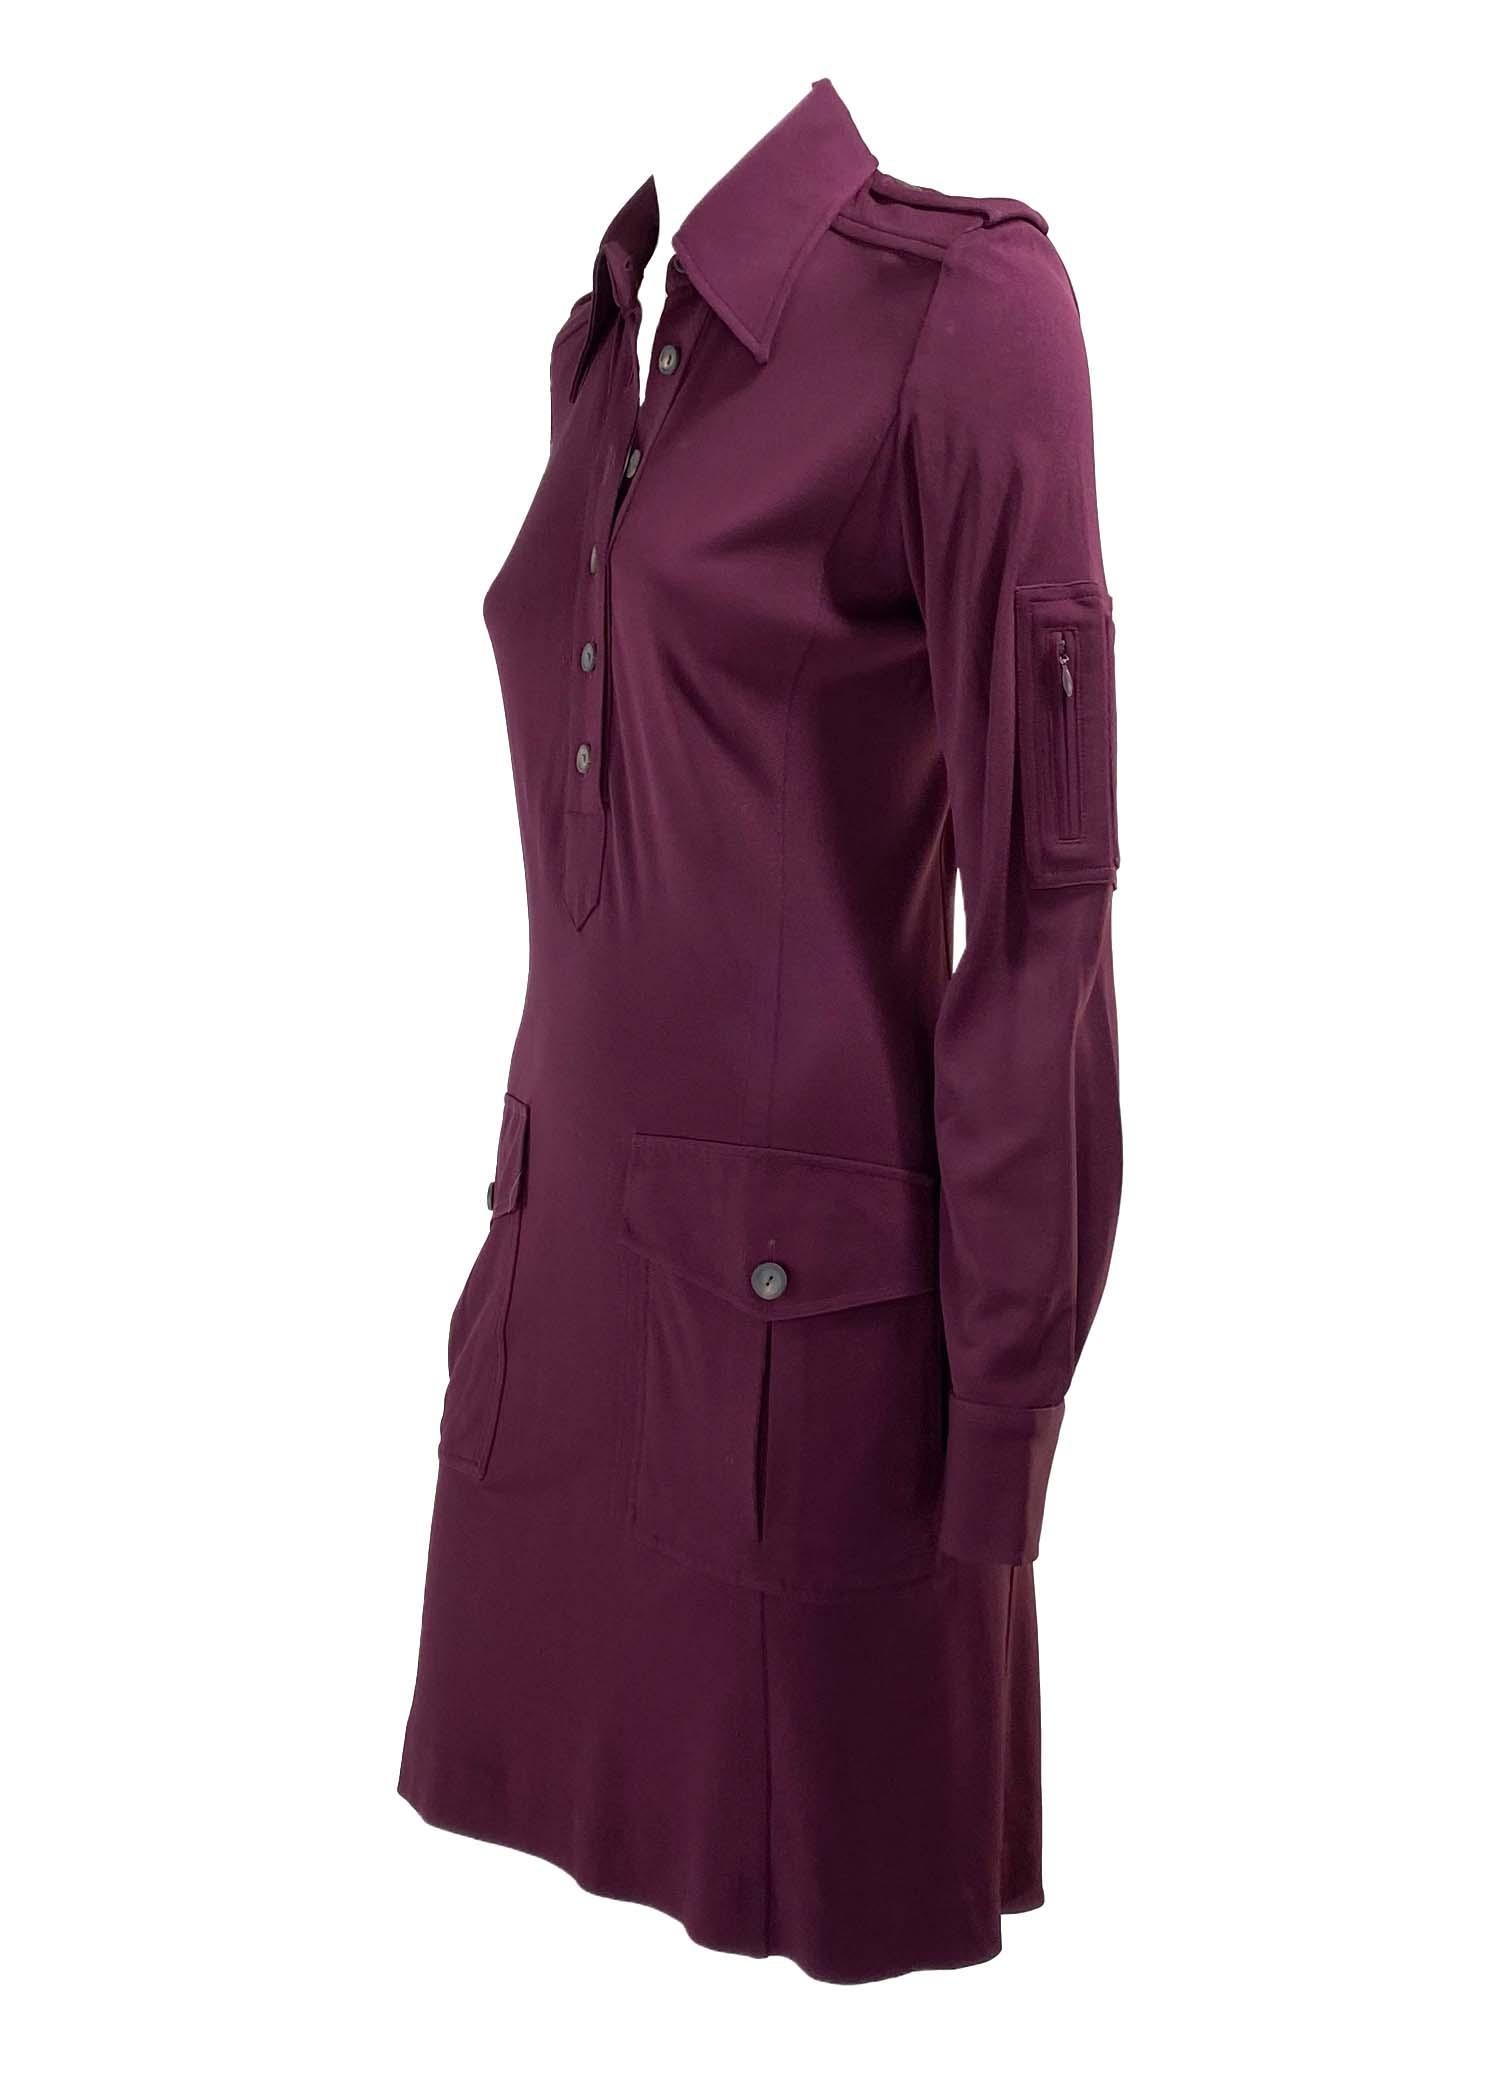 Women's F/W 1996 Gucci by Tom Ford Burgundy Military Inspired Button Up Pocket Dress For Sale